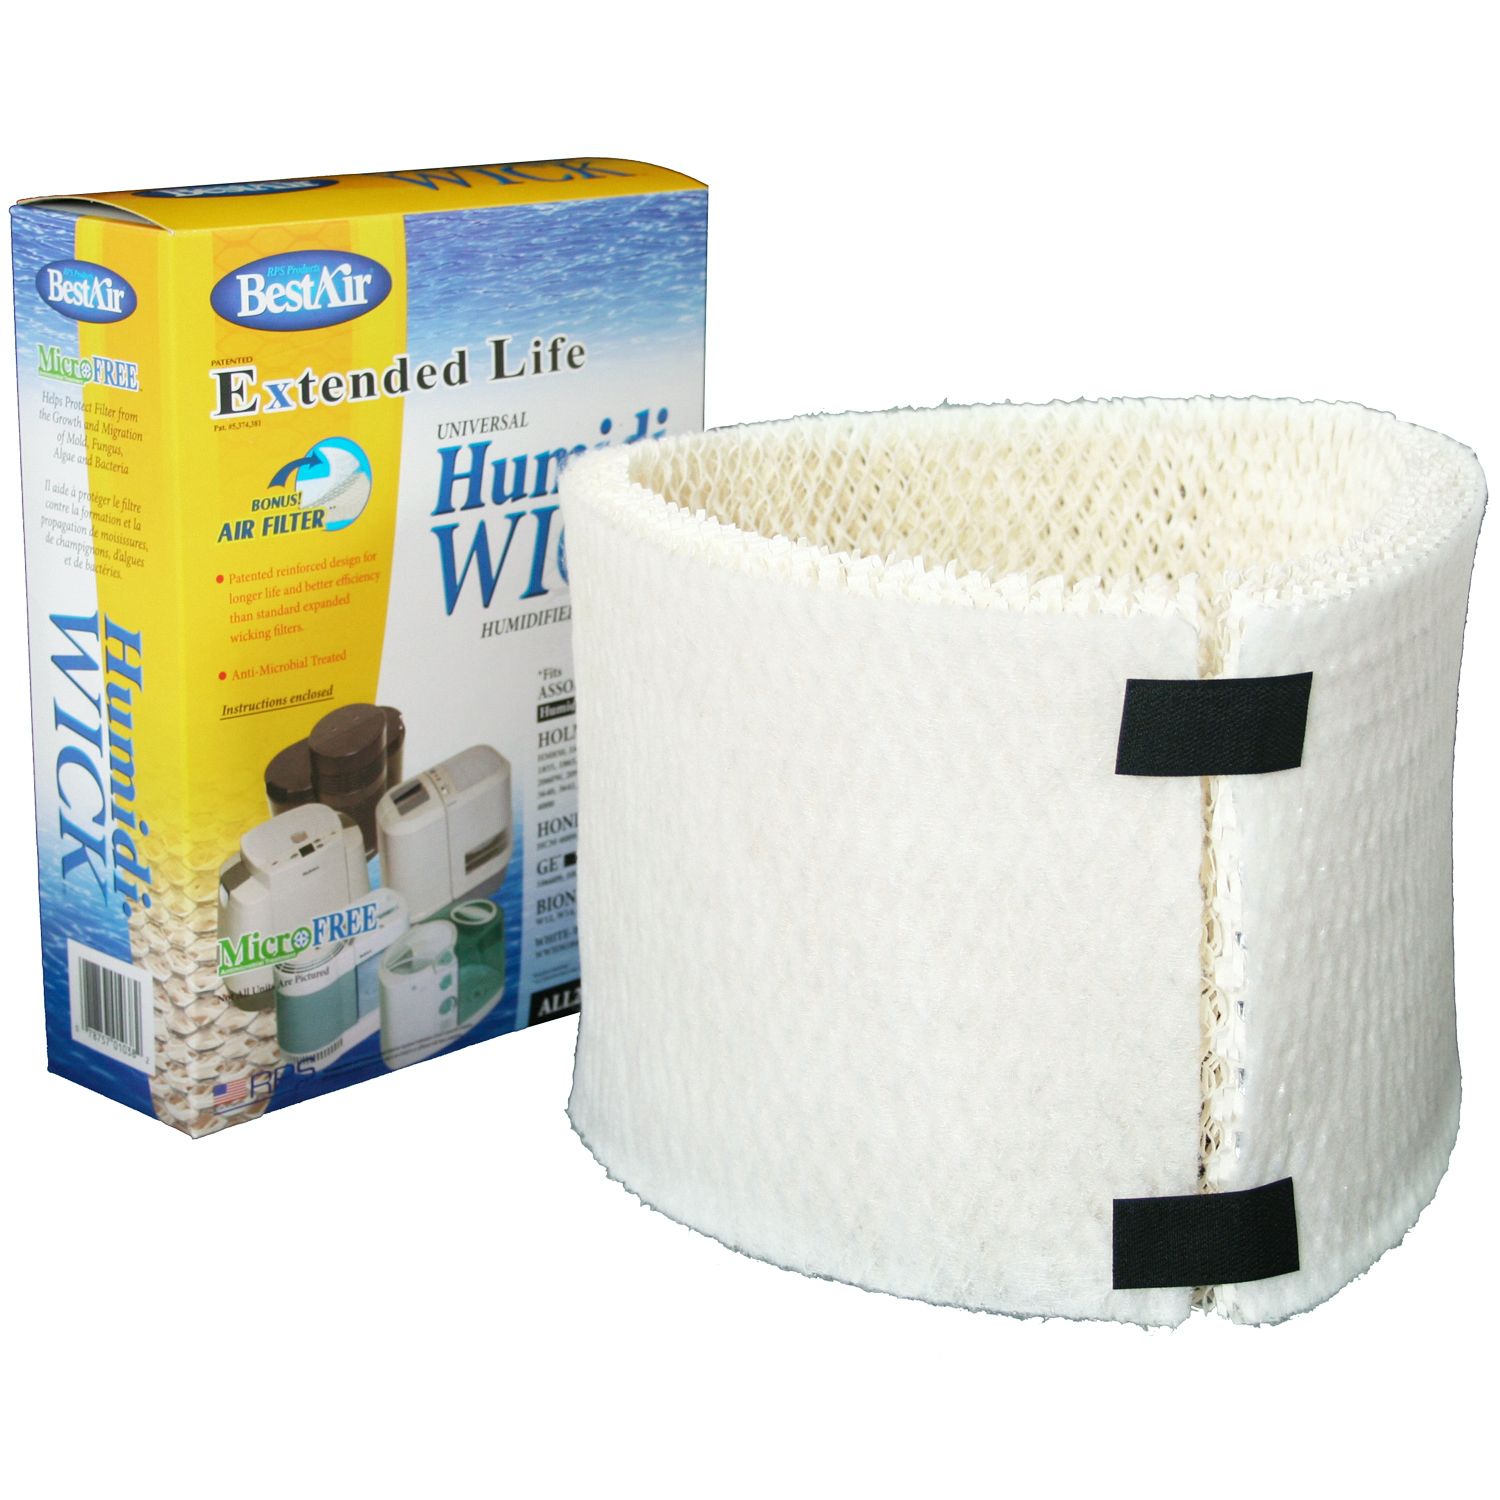 Lot of 2 BestAir ALL2 Universal Humidifier WICK Filter Holmes